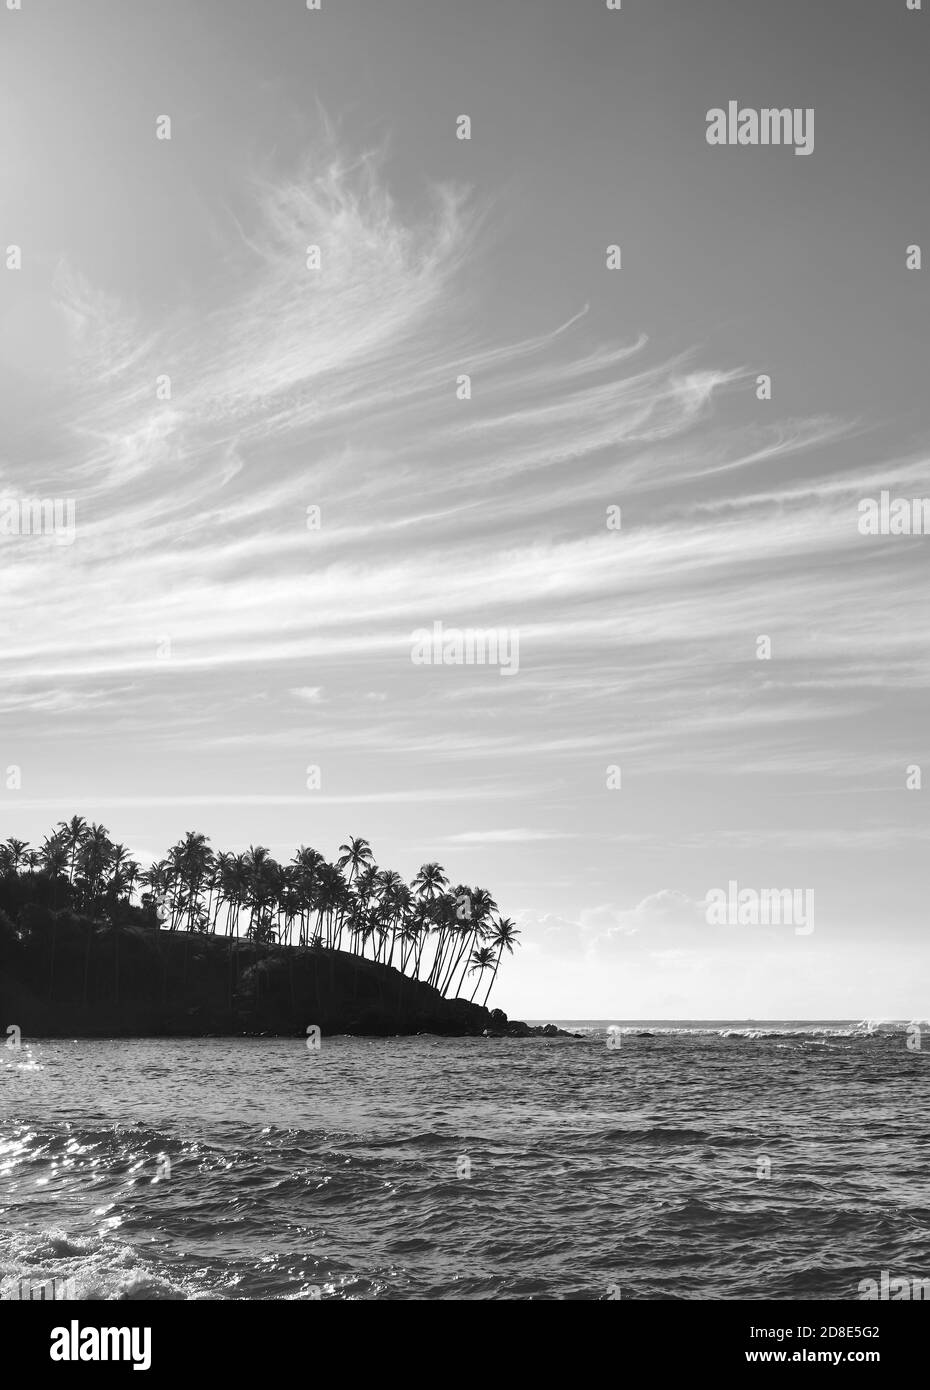 Black and white picture of tropical island coast with palm trees ...